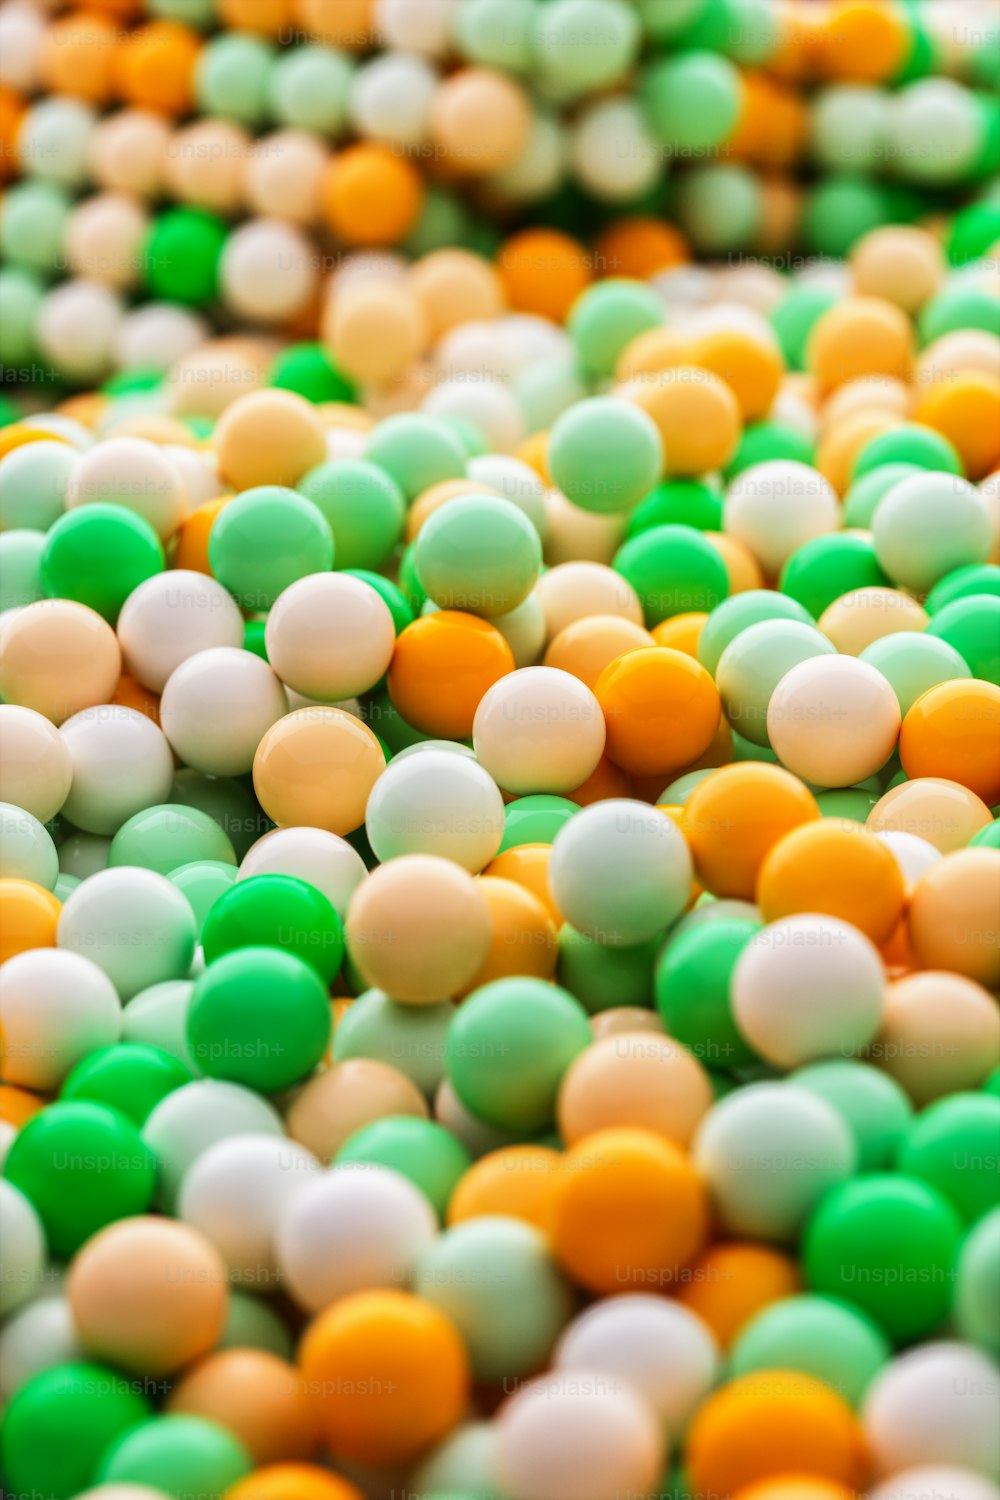 a close up of a bunch of green and white balls